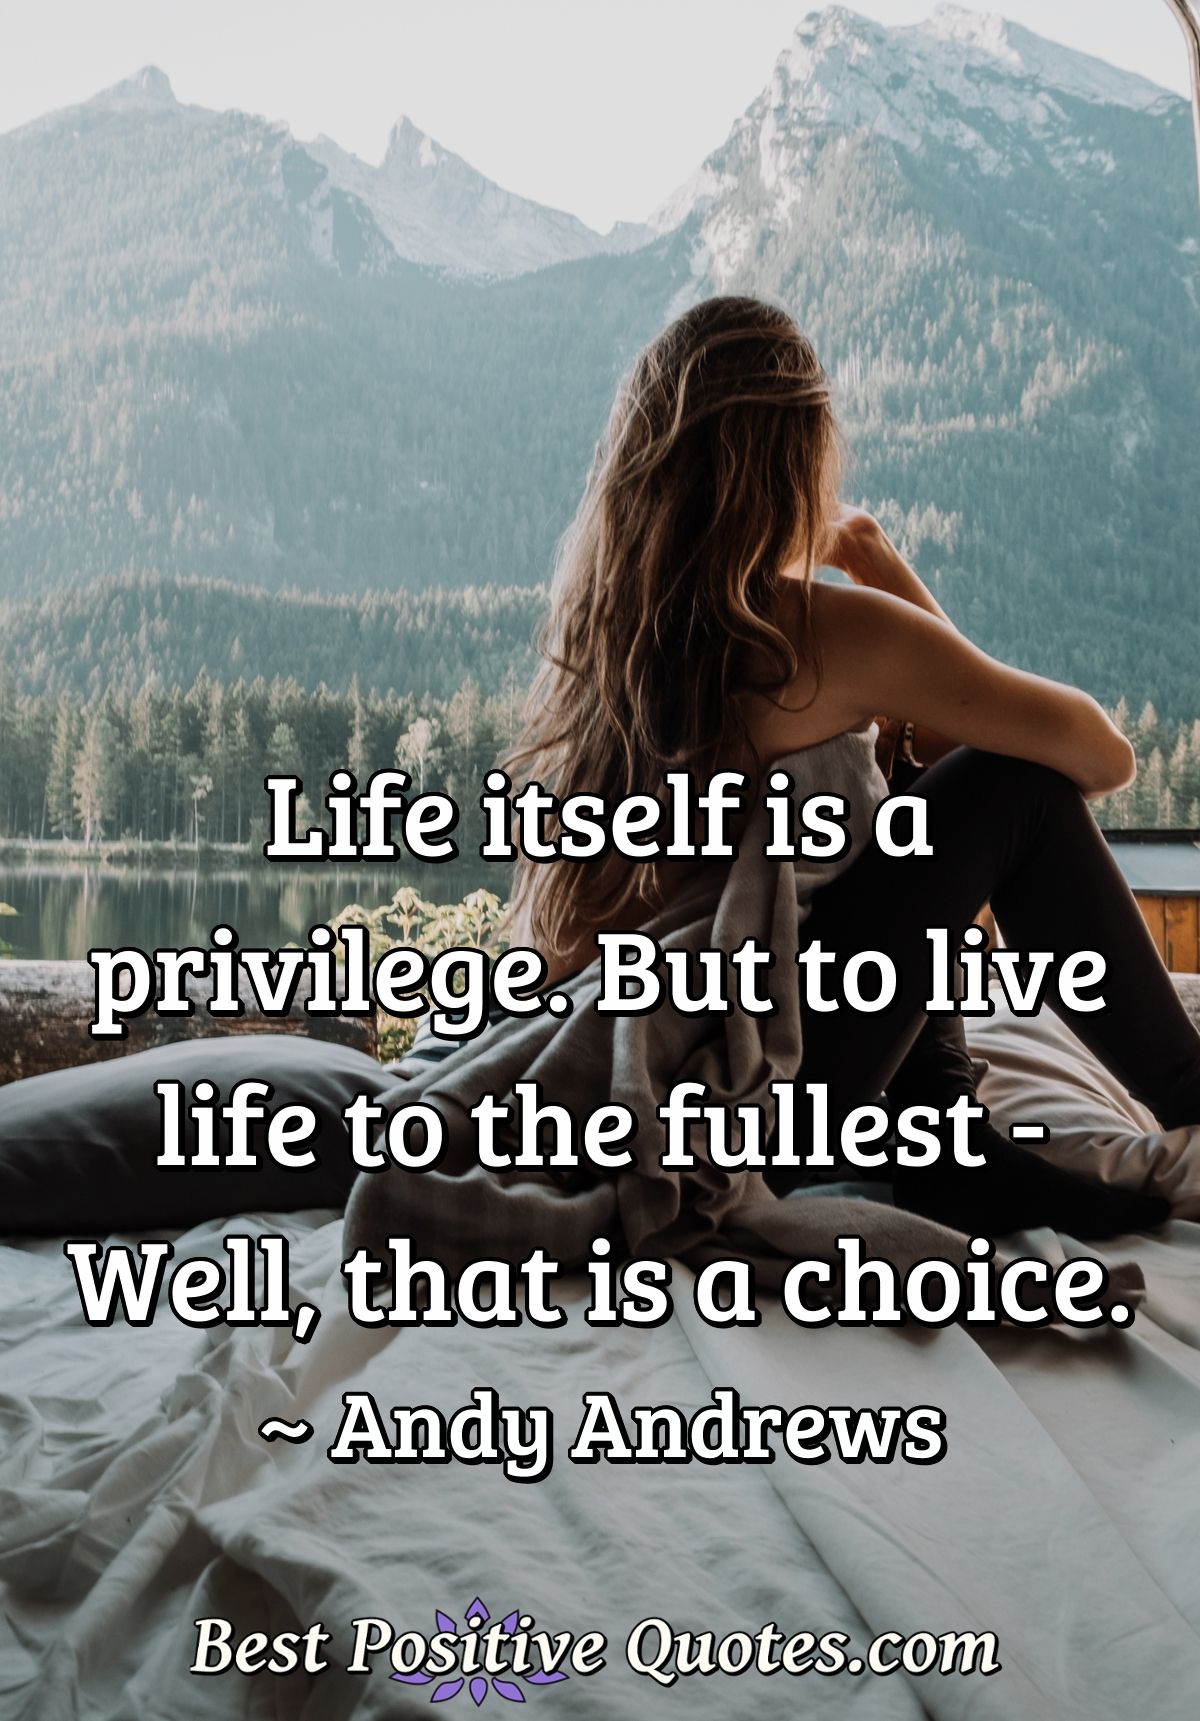 Life itself is a privilege. But to live life to the fullest - Well, that is a choice. - Andy Andrews